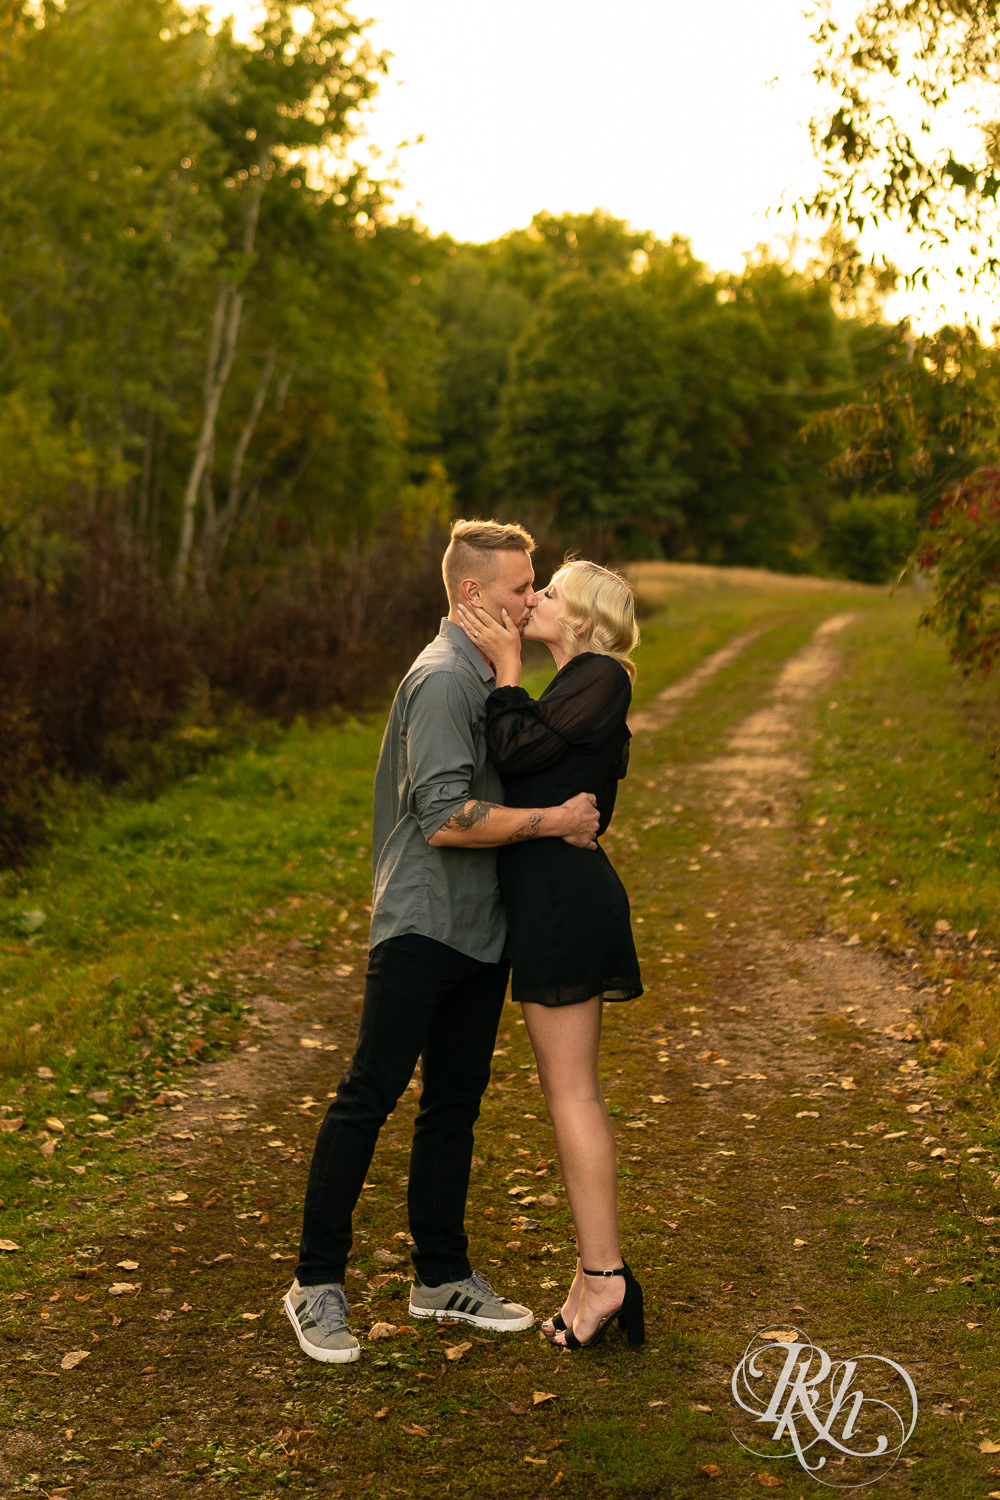 Blond woman in black dress and man in dress shirt damce during sunset engagement photos at Lebanon Hills Regional Park in Eagan, Minnesota.